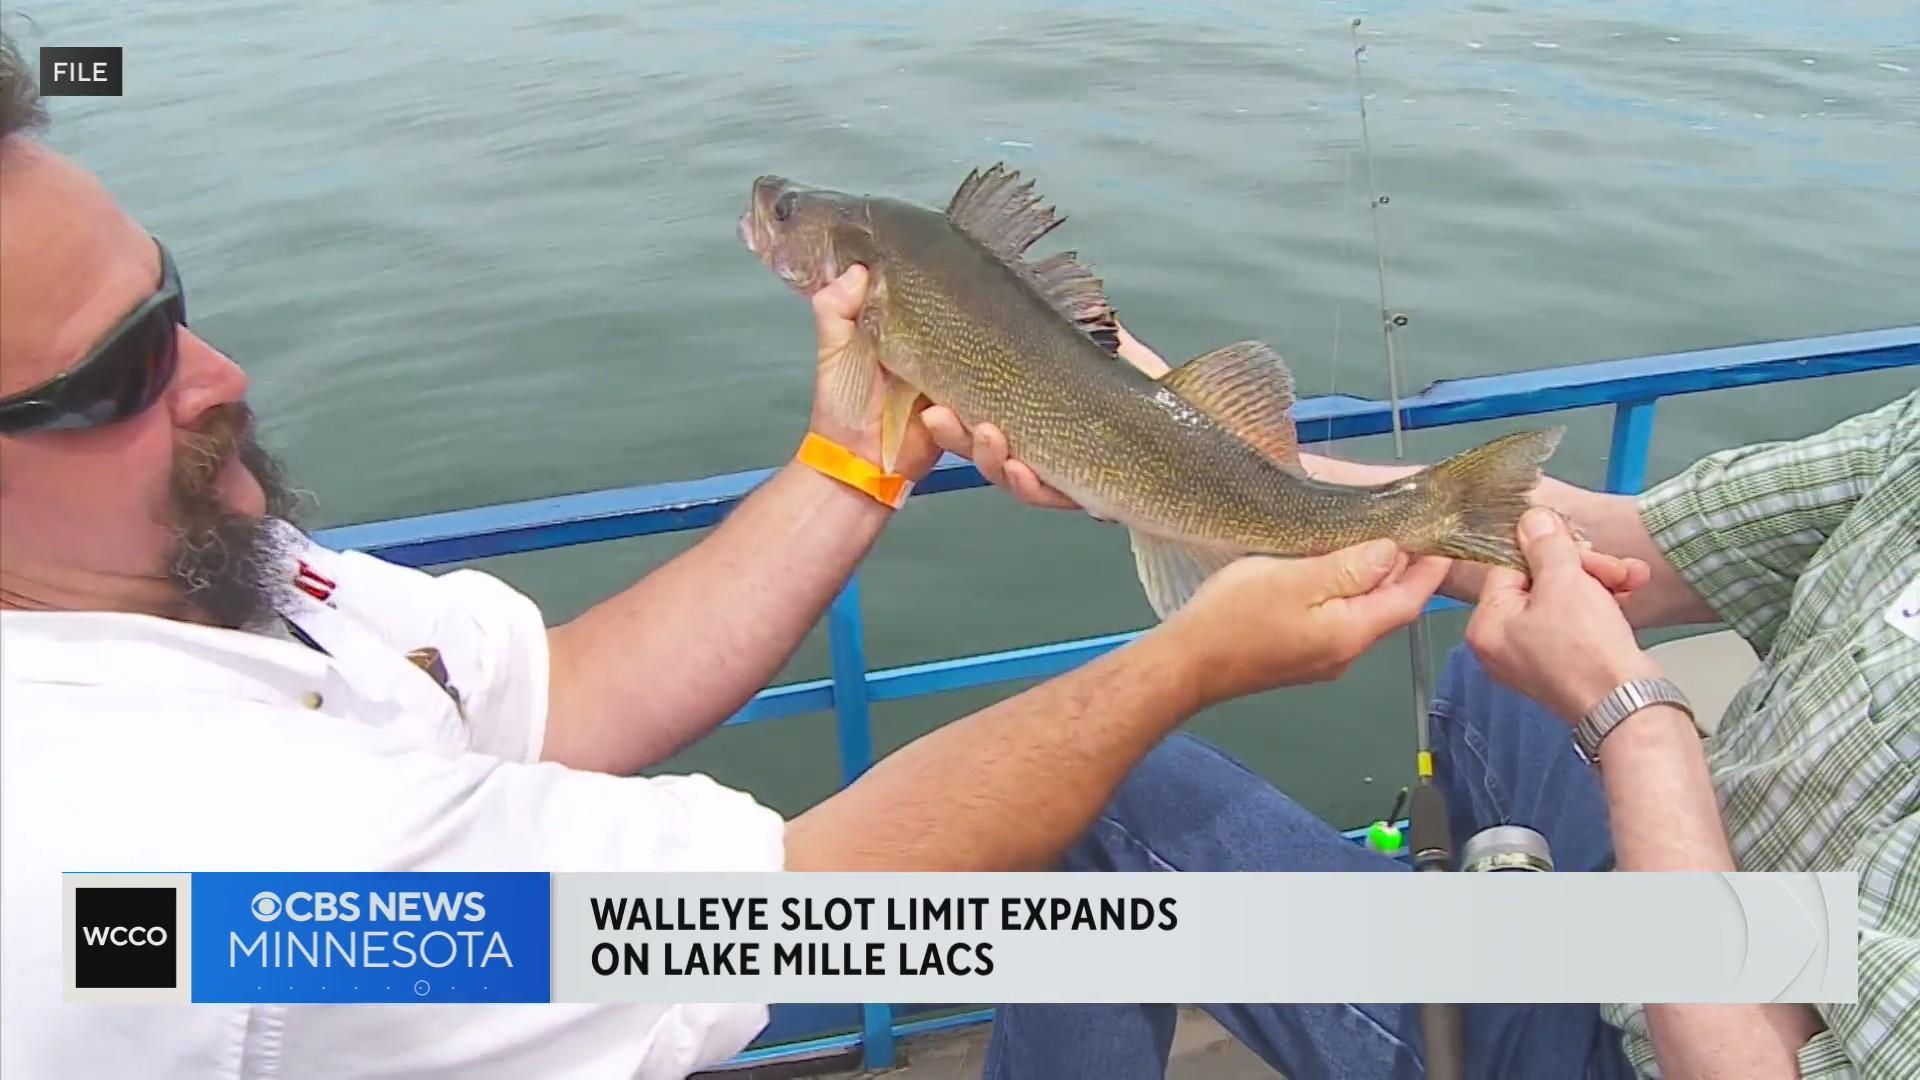 Under locals' scrutiny, DNR nets for Mille Lacs walleye health